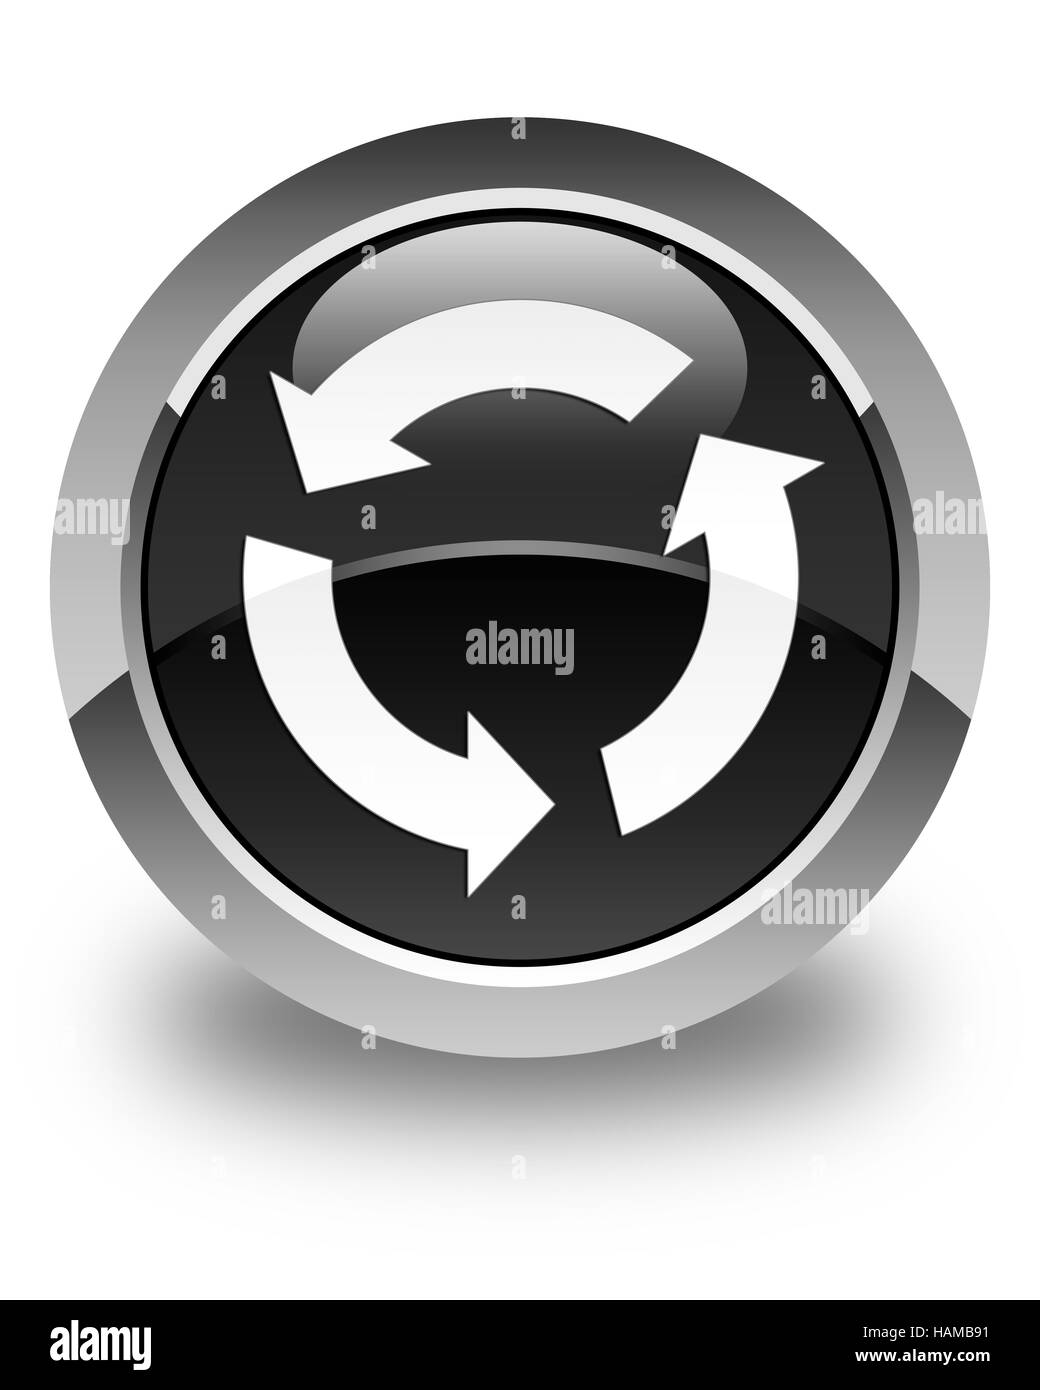 Refresh icon isolated on glossy black round button abstract illustration Stock Photo